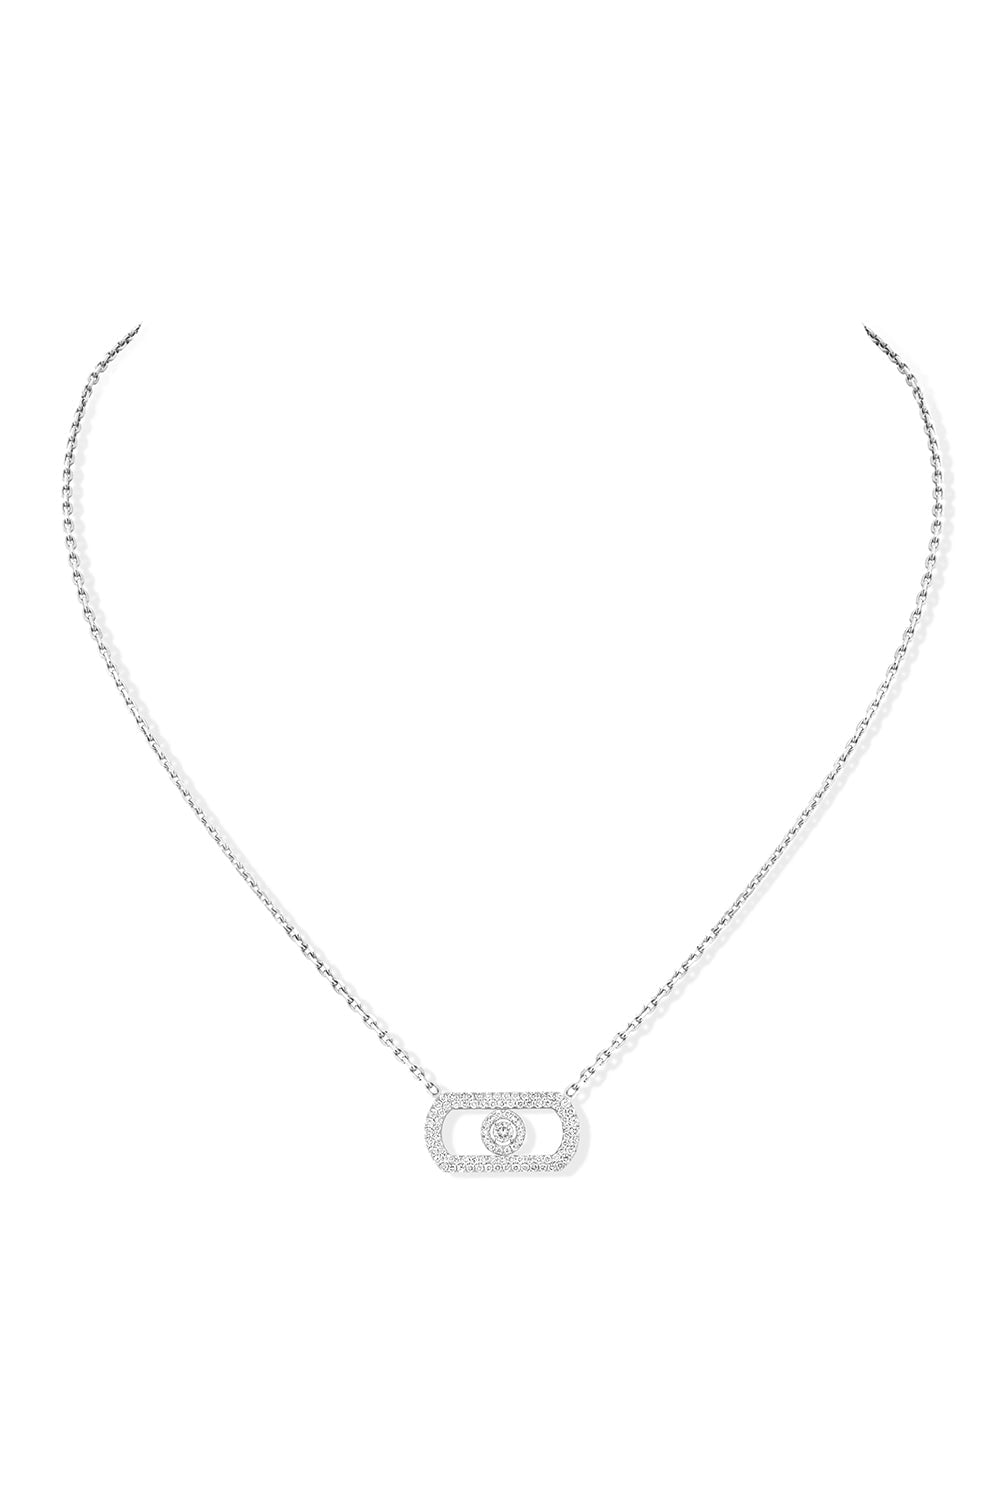 MESSIKA-So Move Pave Diamond Necklace-WHITE GOLD